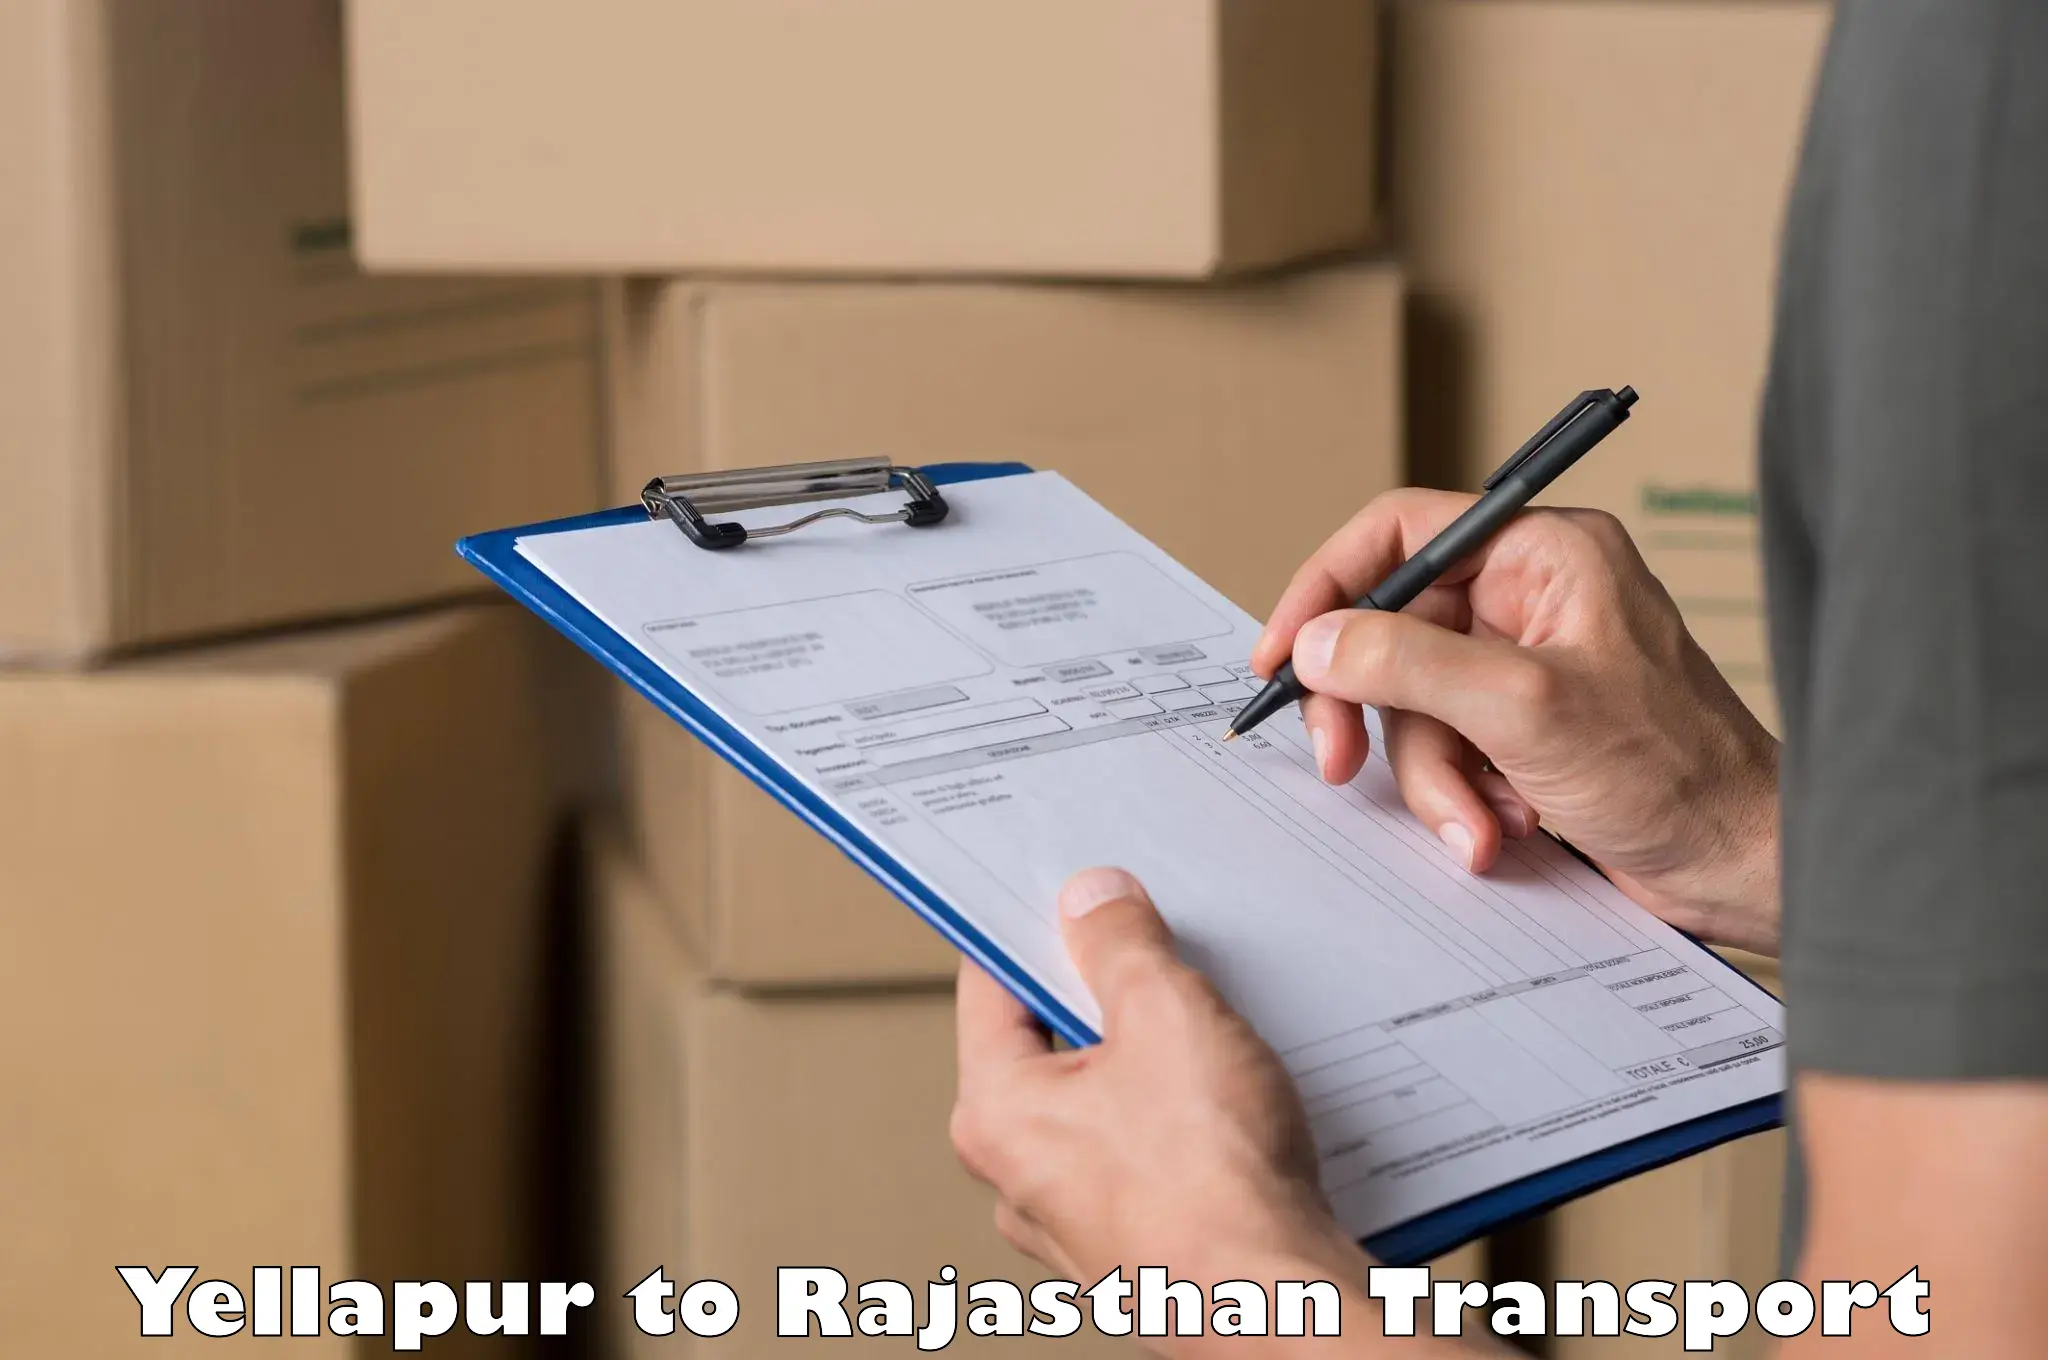 Nationwide transport services Yellapur to Rajasthan